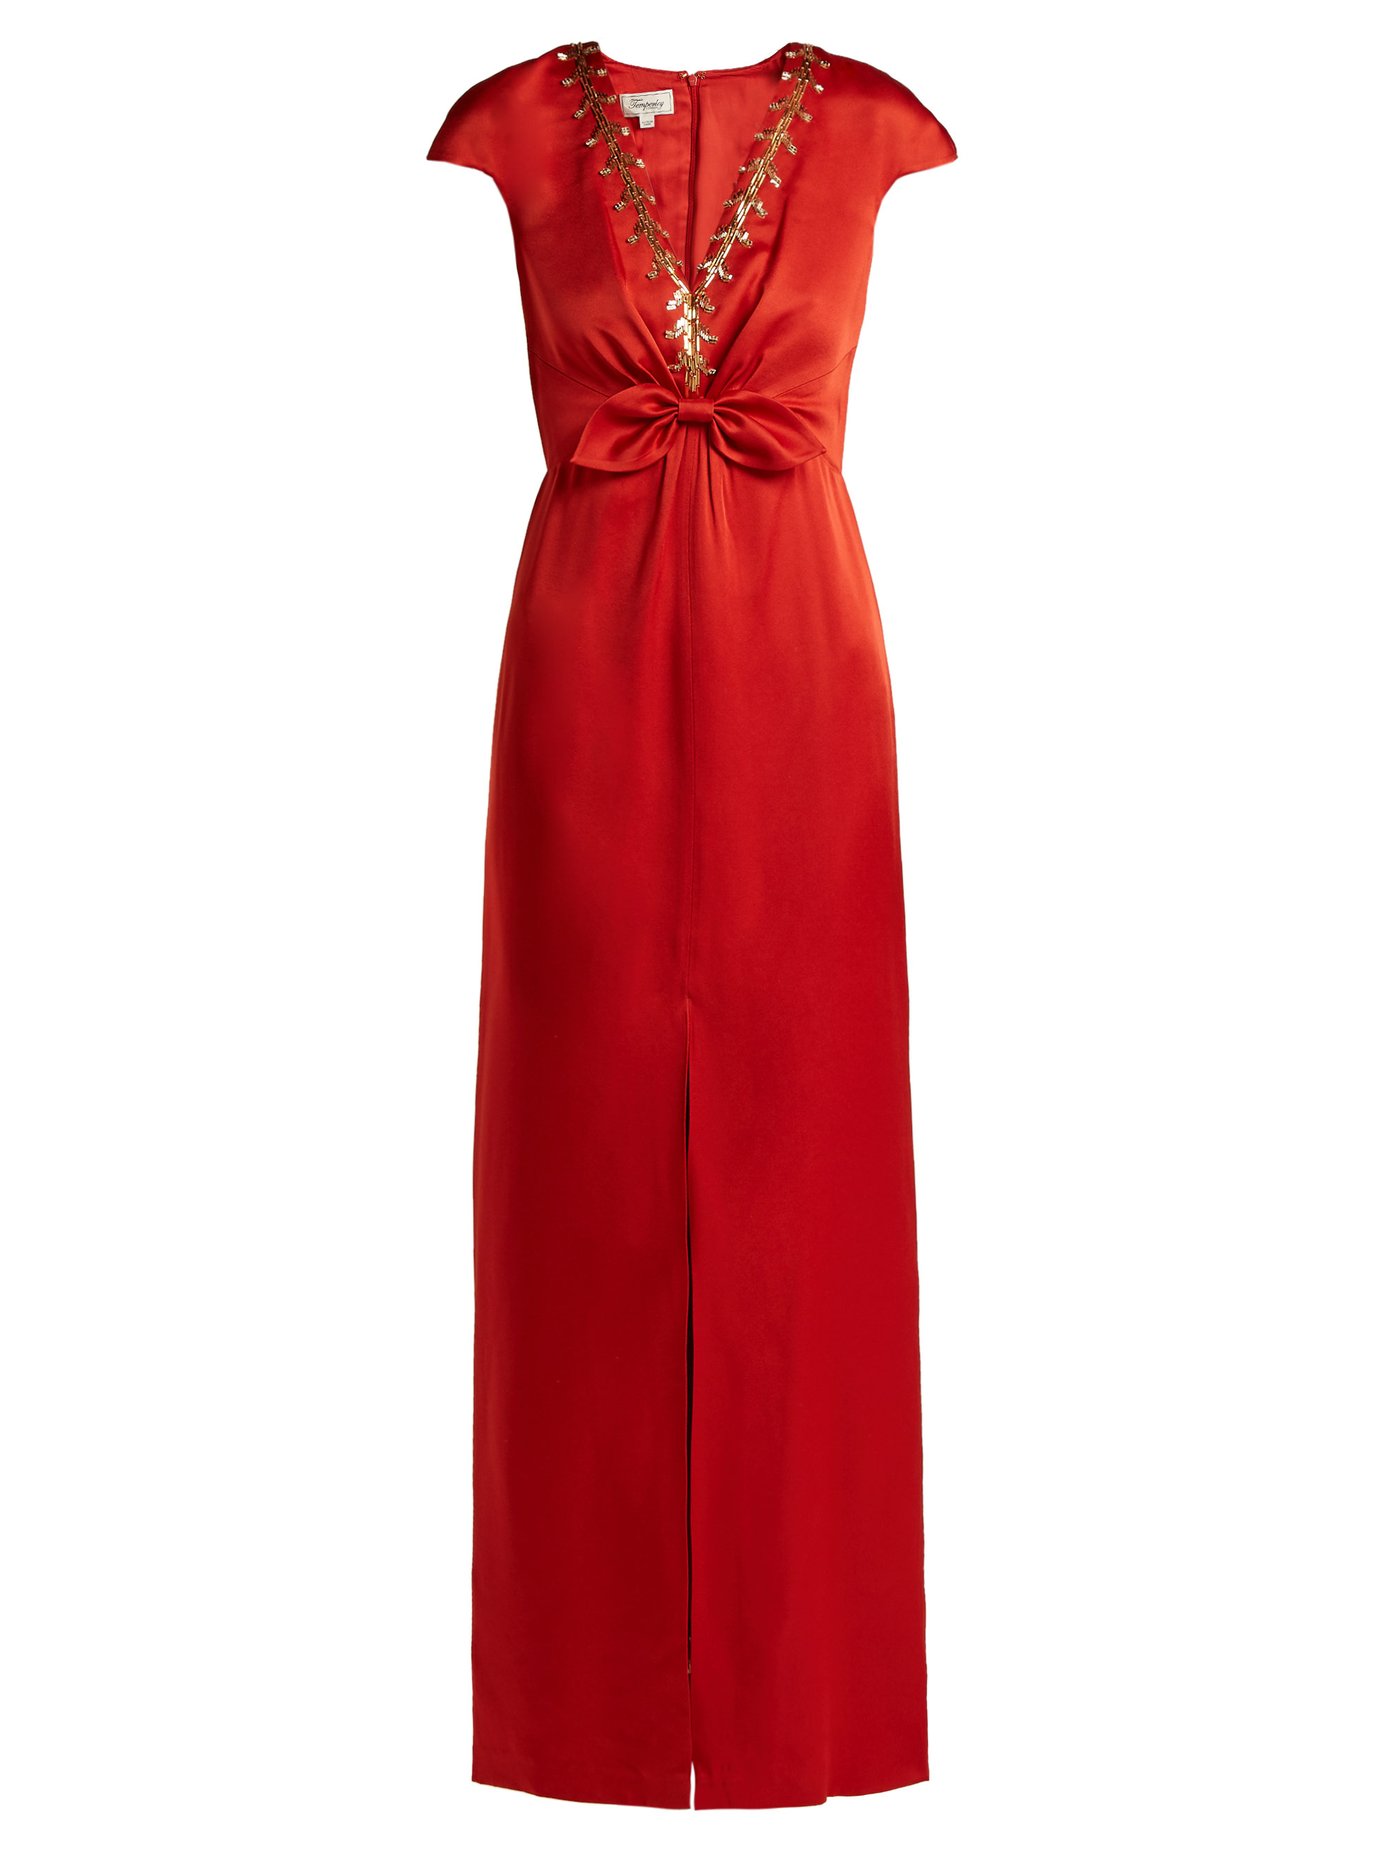 Temperley London Nile sequin-embellished satin gown